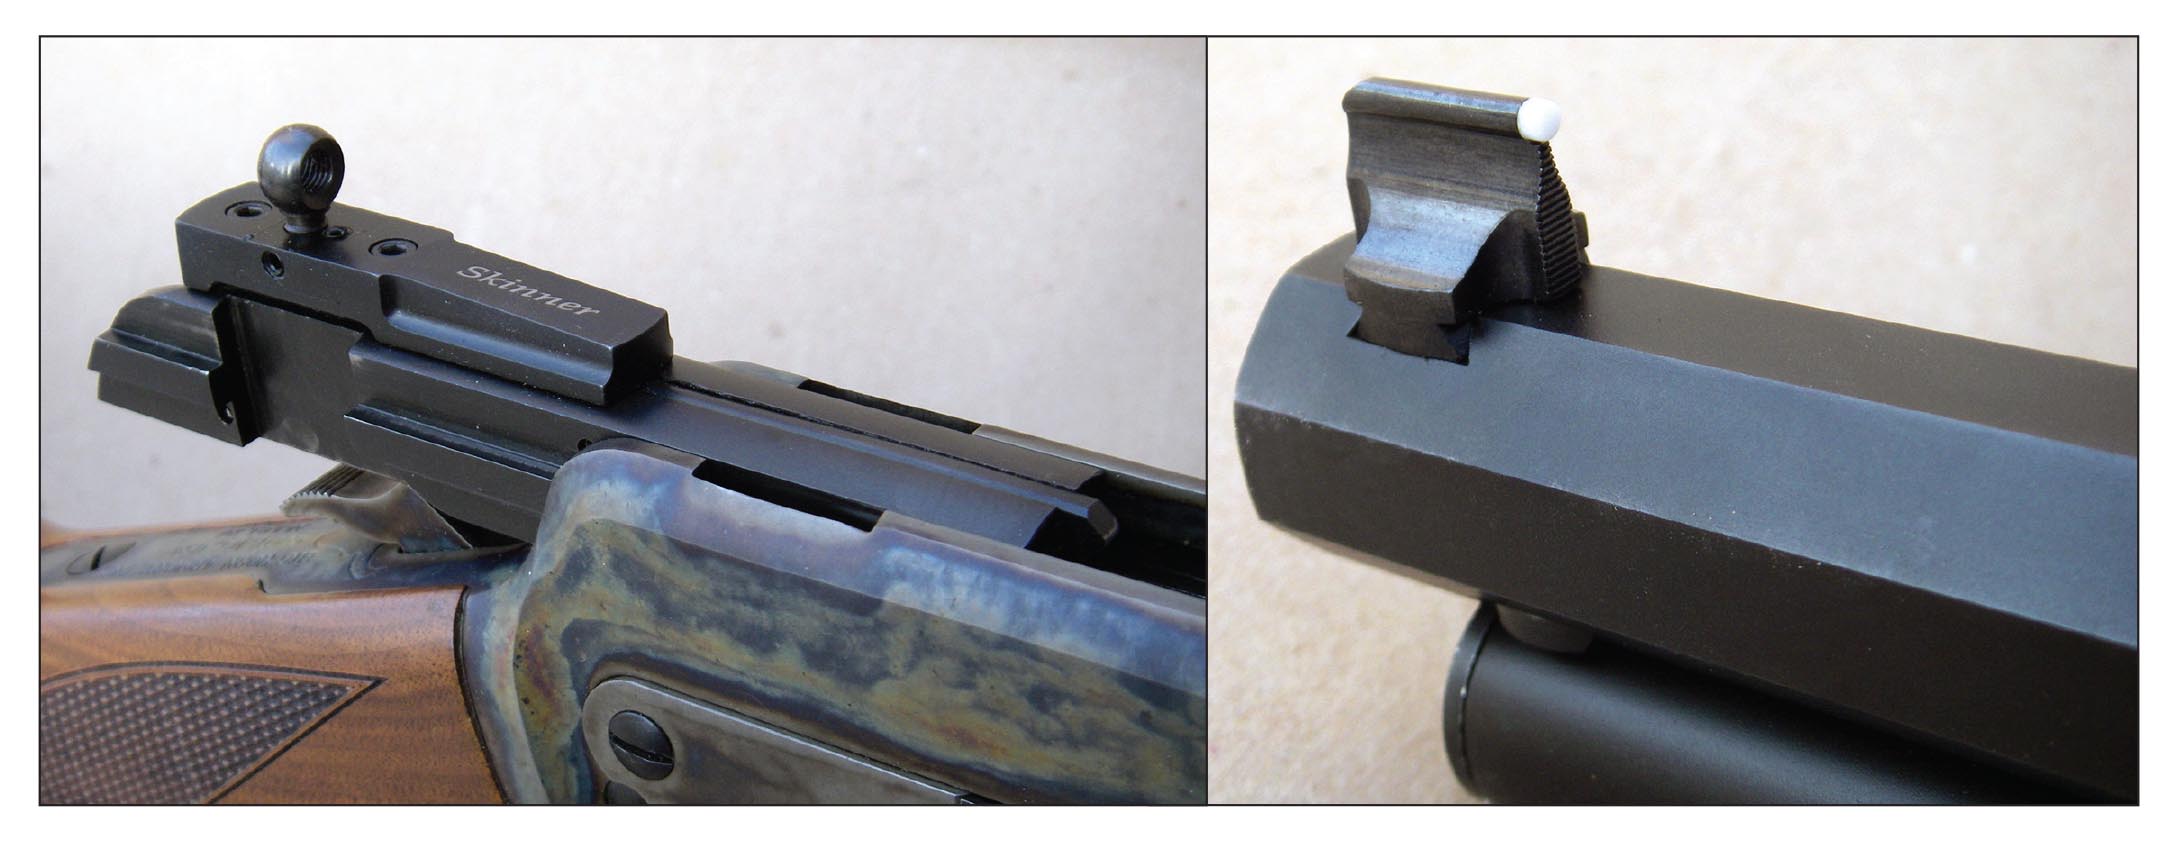 The Skinner Sights bolt-mounted aperture is fully adjustable for windage and elevation. The front sight is dovetailed into the barrel.